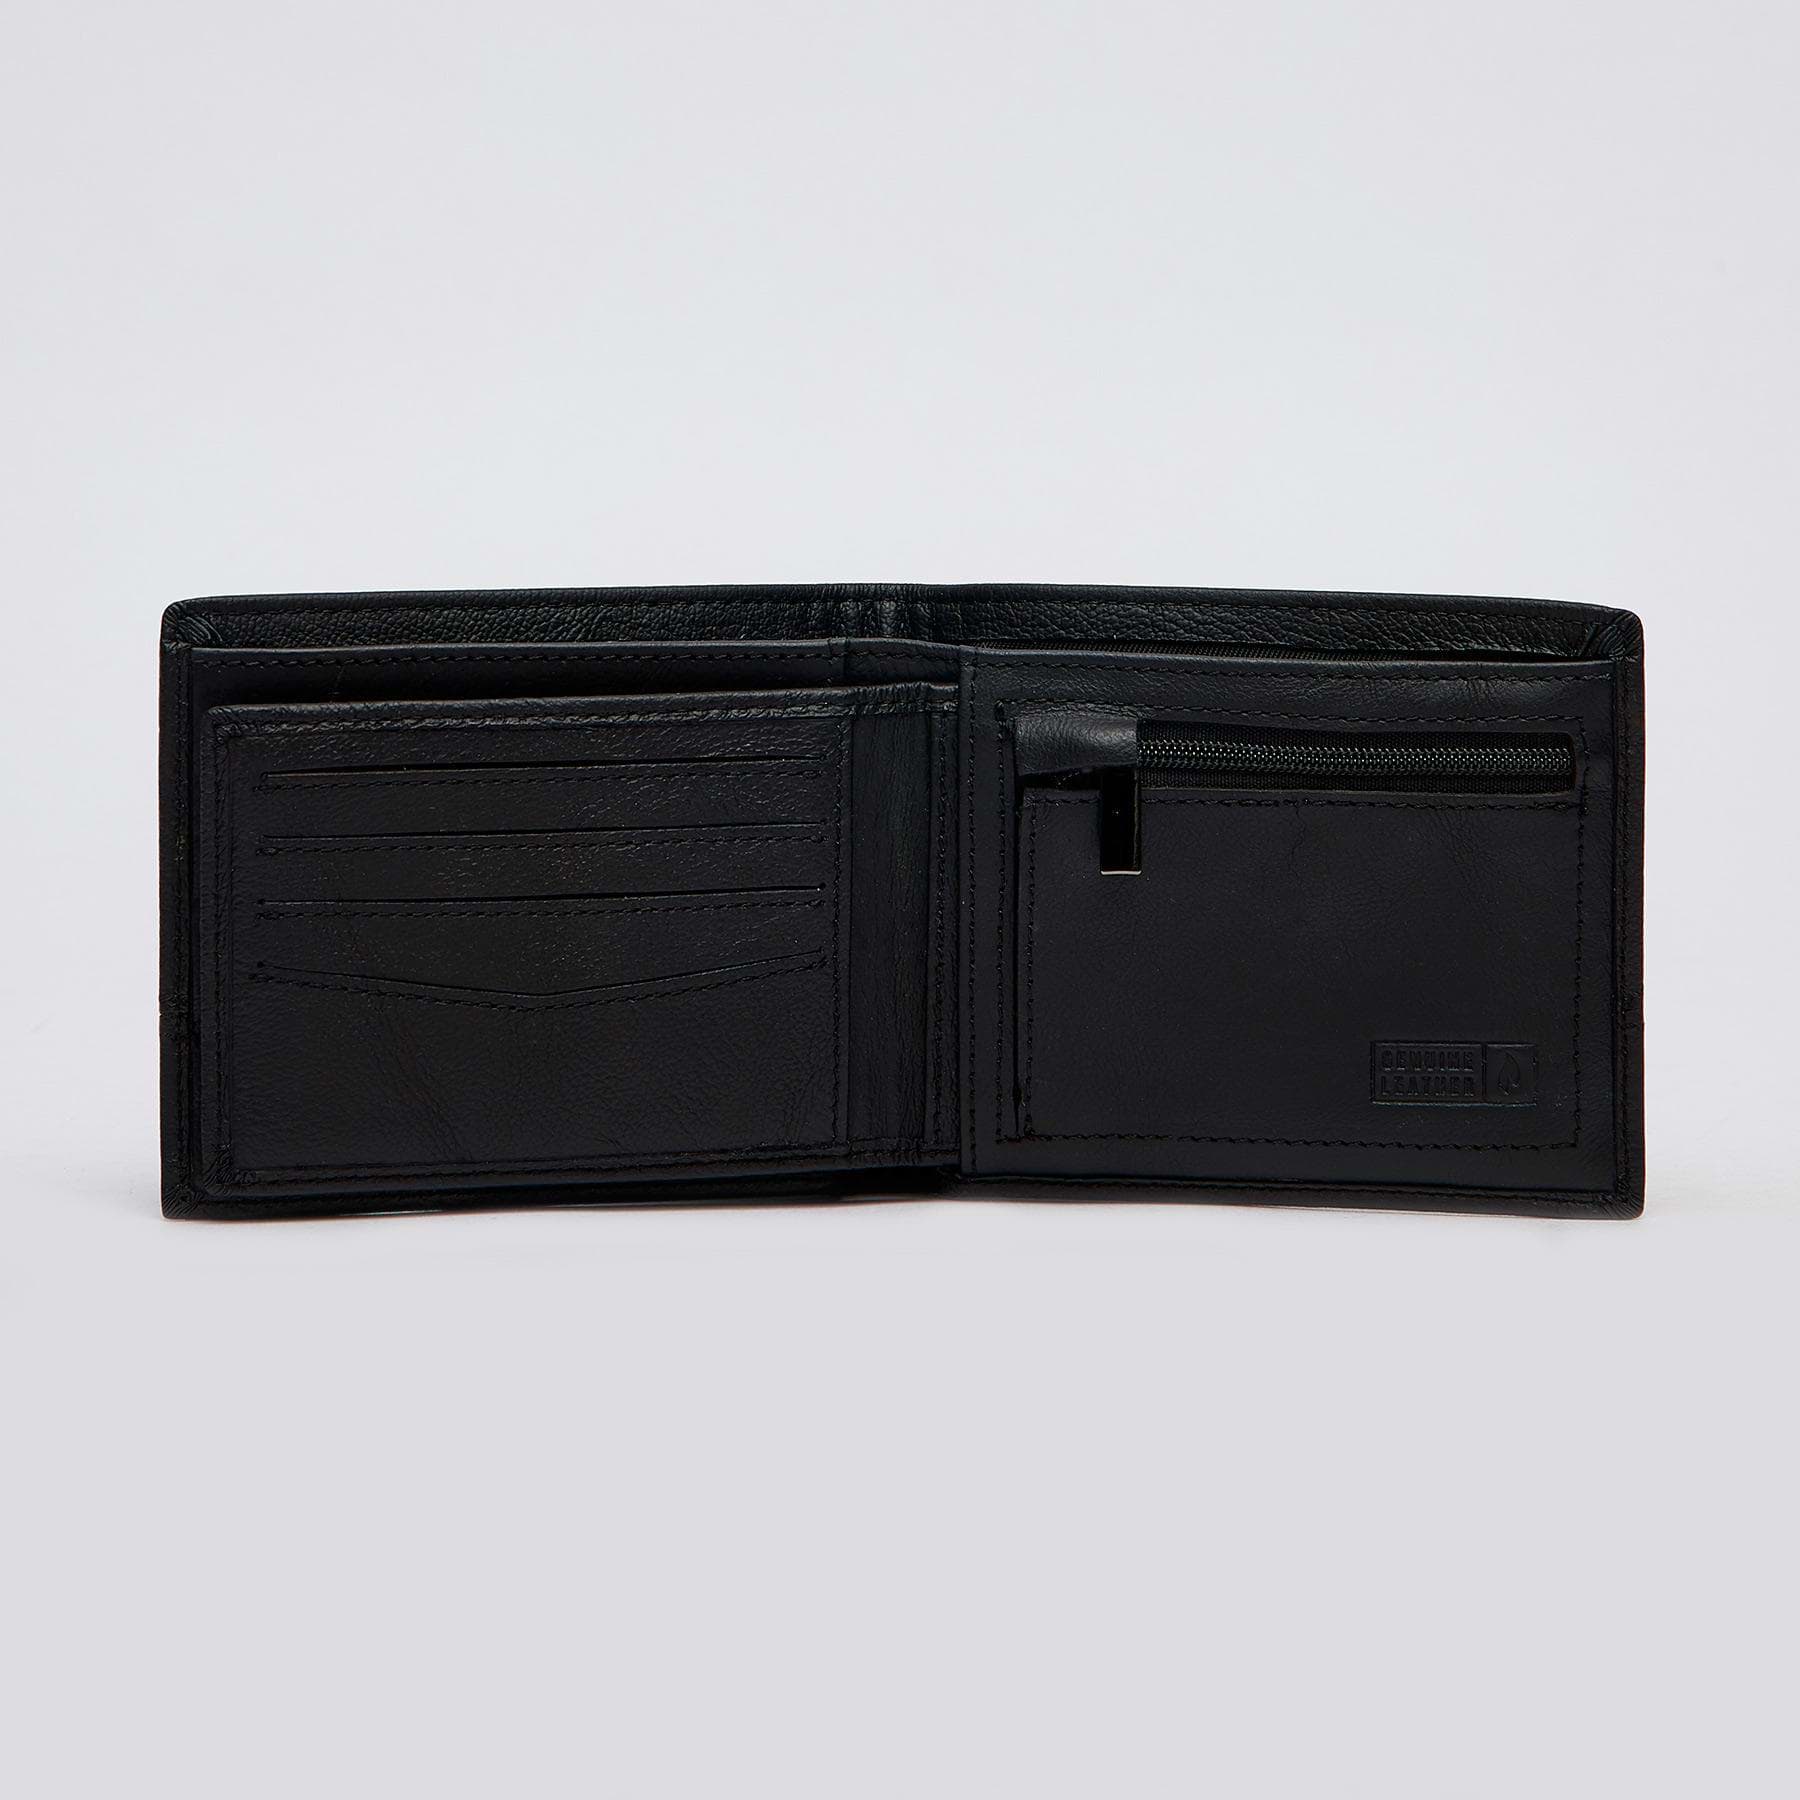 Lucid Trifold Leather Wallet In Black - Fast Shipping & Easy Returns ...